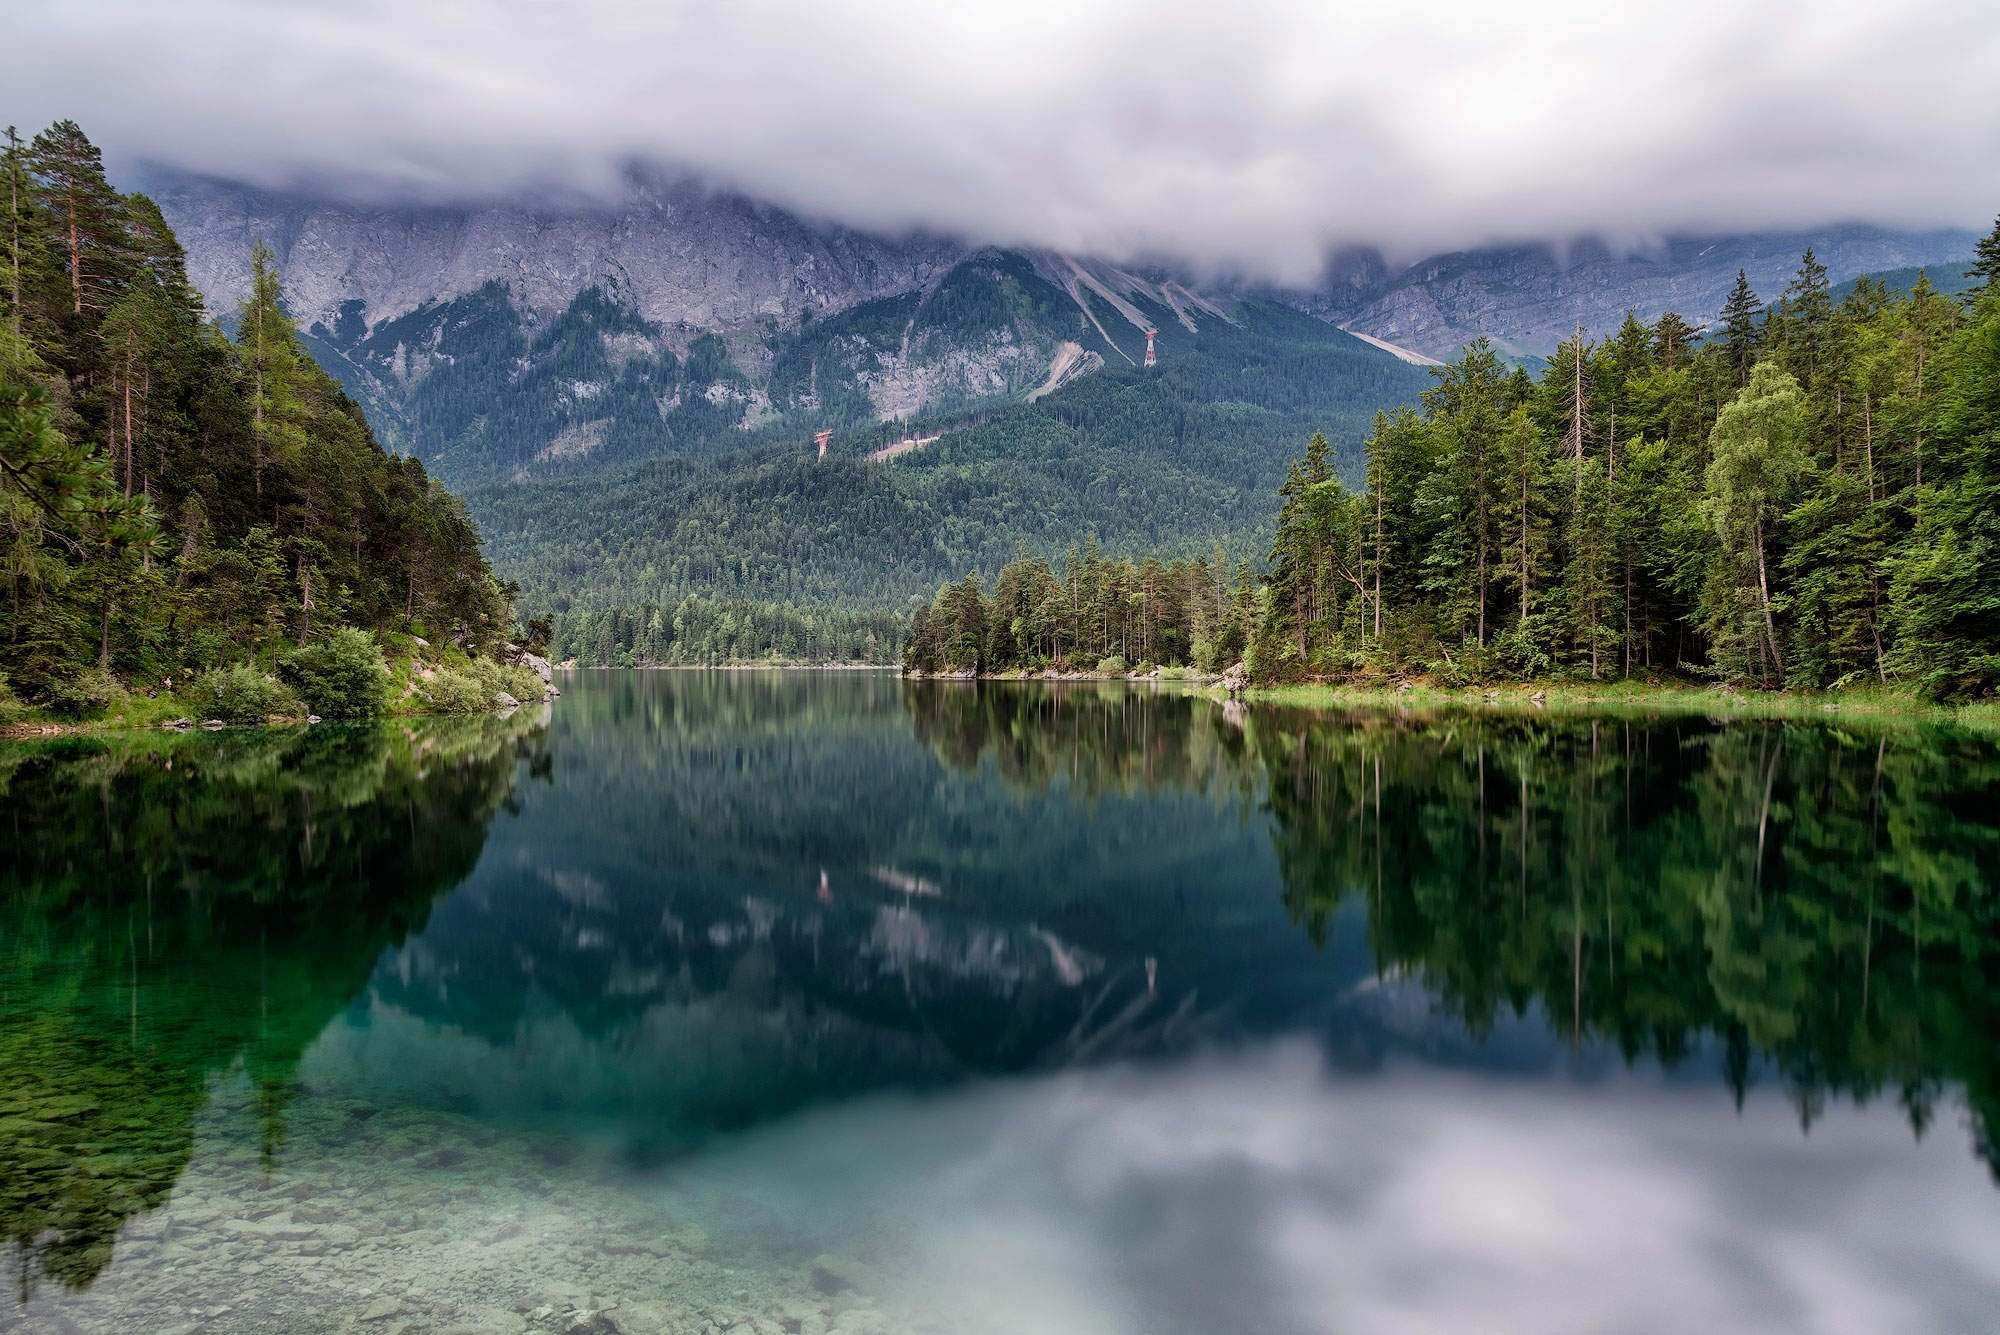 photography, Landscape, Nature, Overcast, Lake, Reflection, Forest, Mountains, Summer, Germany Wallpaper